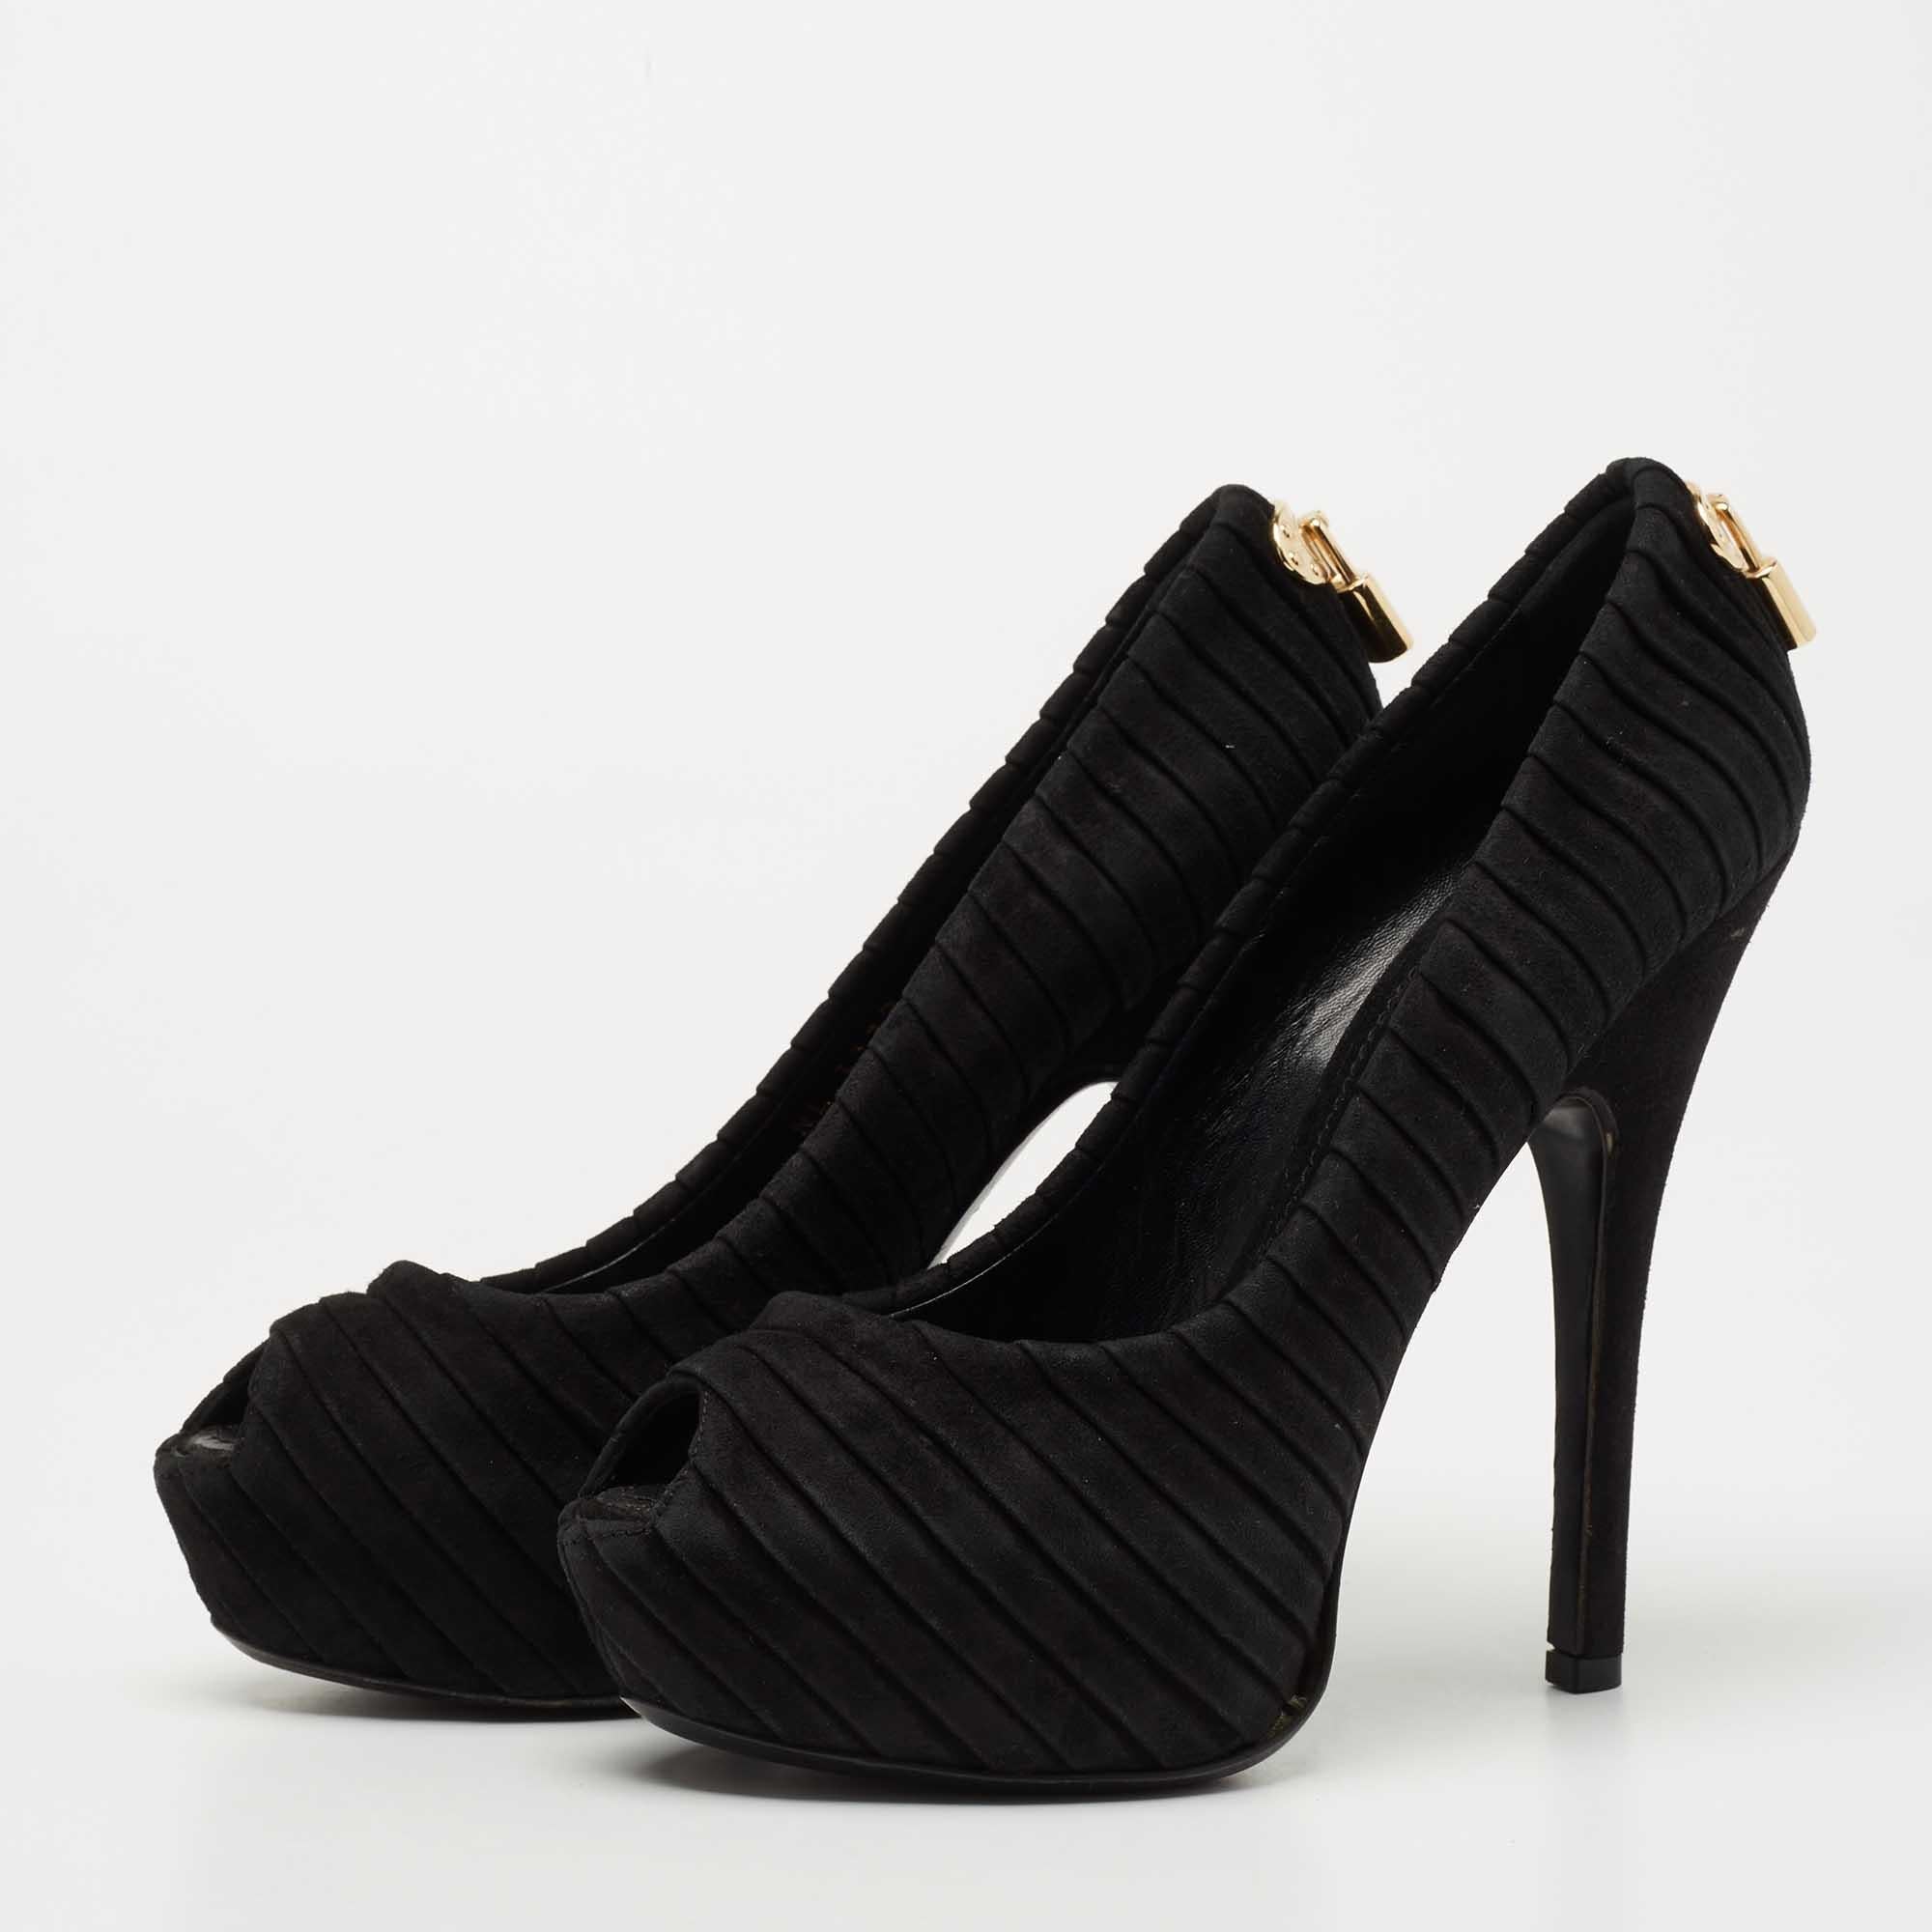 Louis Vuitton Black Pleated Suede Oh Really! Peep Toe Pumps Size 36.5 4